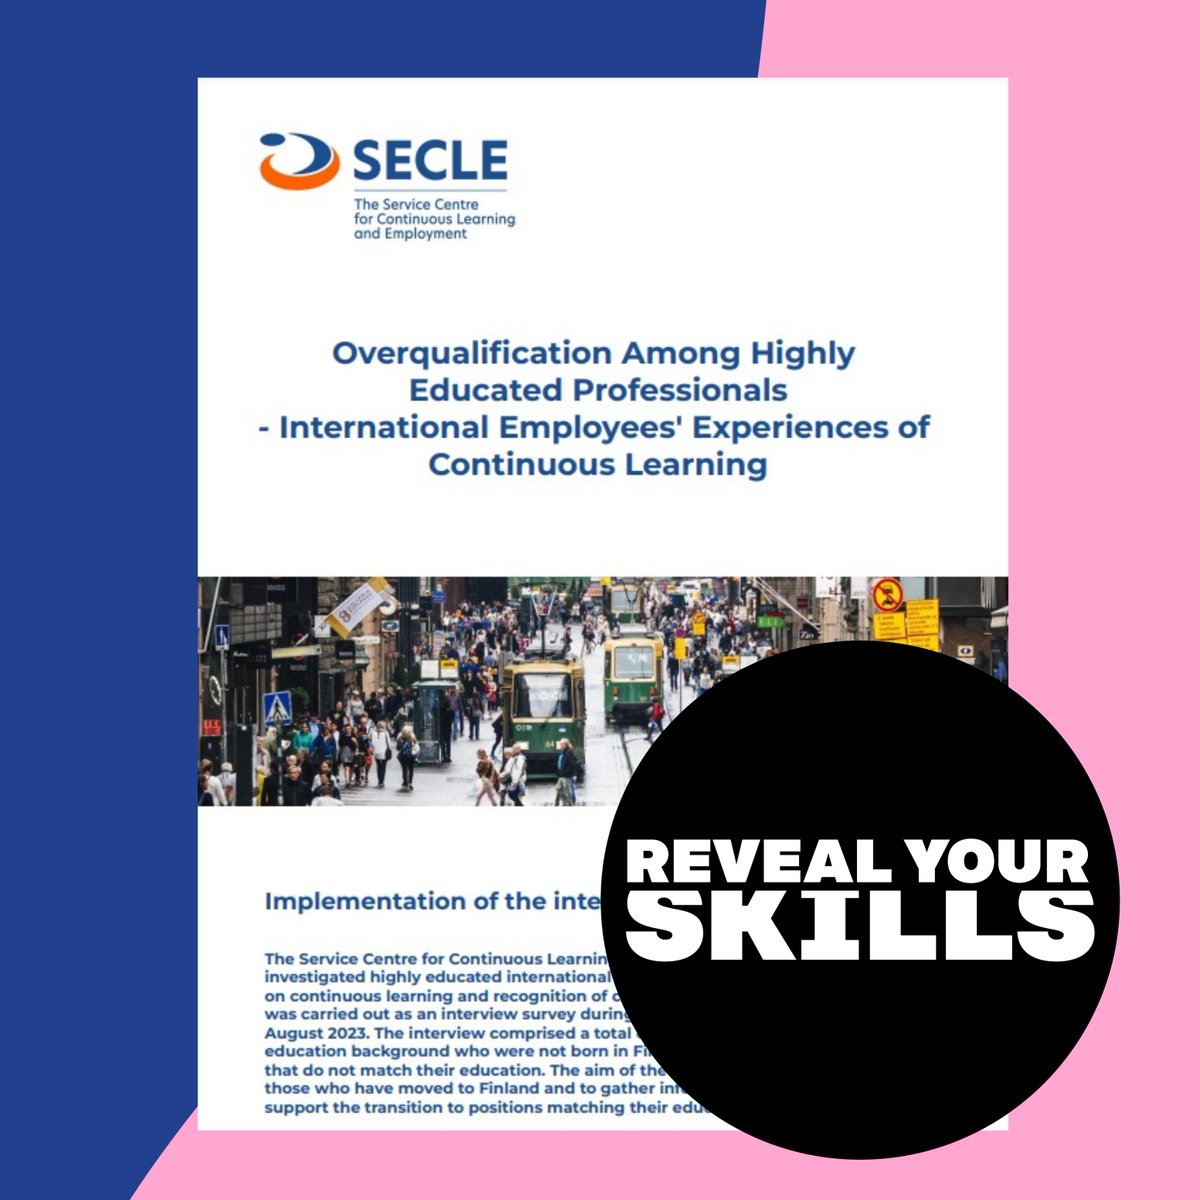 We investigated highly #educated #international professionals’ views and perceptions on continuous learning and recognition of #competencies in Finland. See the results➡️bit.ly/SECLE2023 #RevealYourSkills